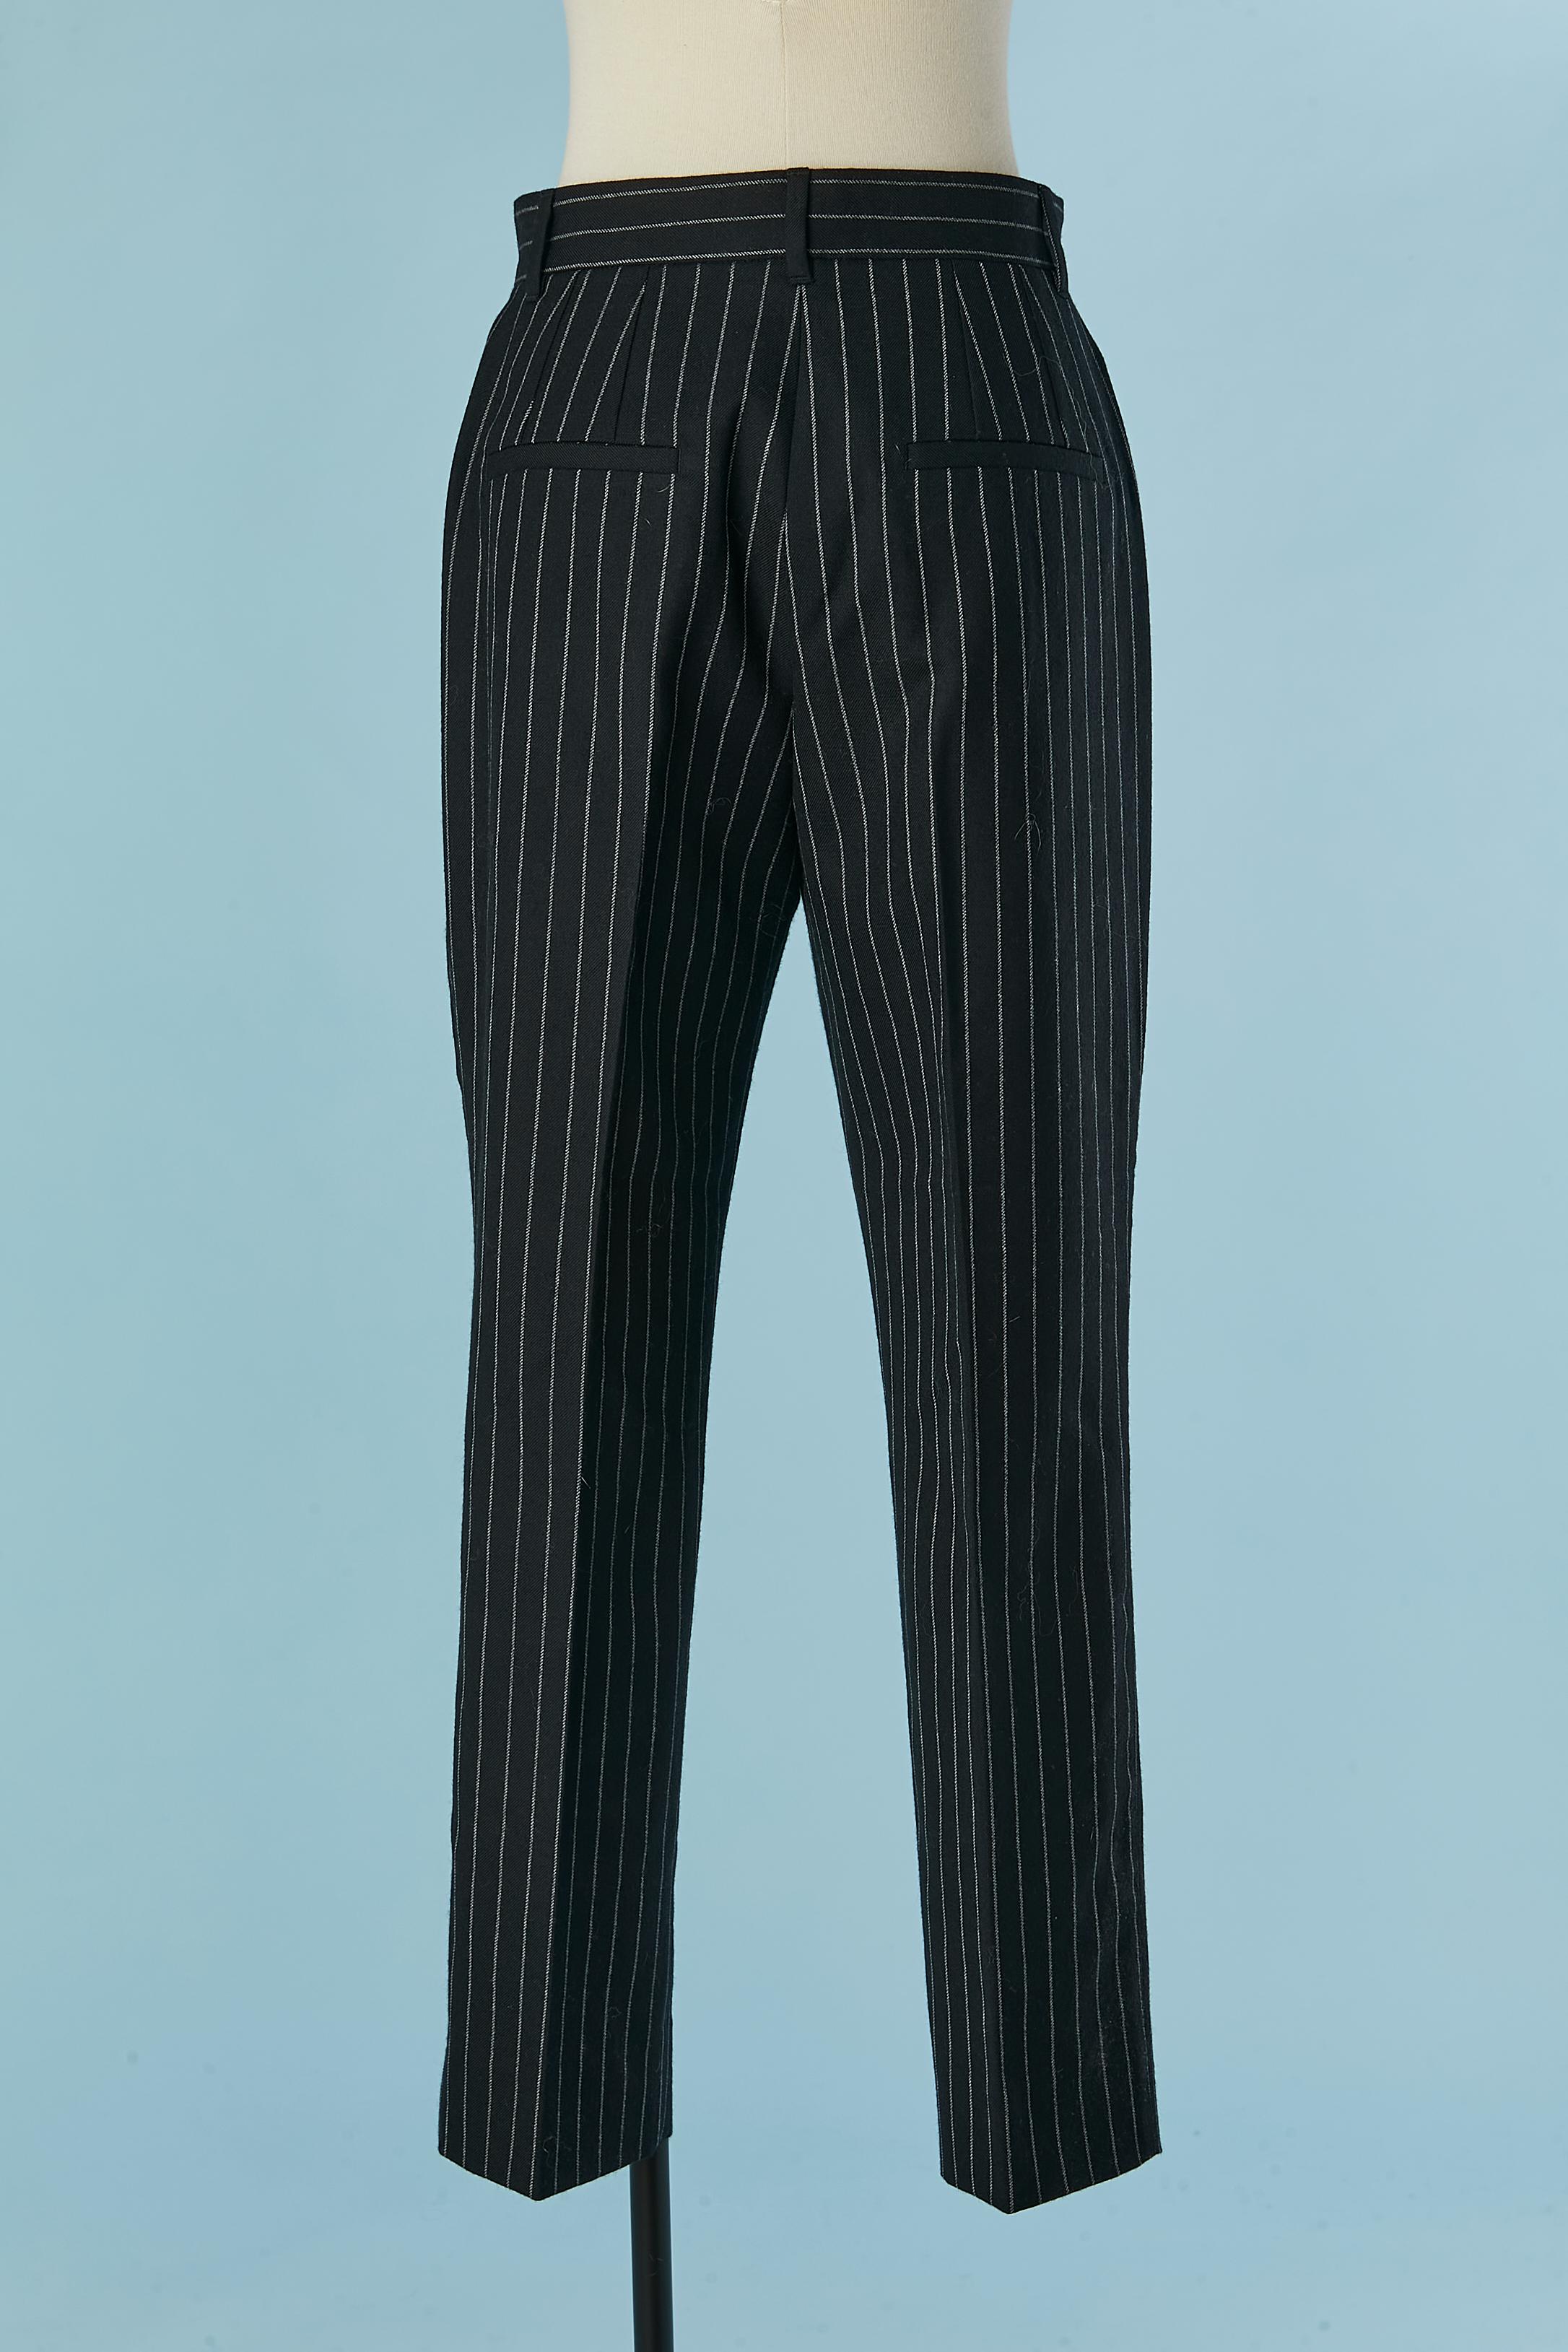 Black and white pin-striped trousers-suit Dolce & Gabbana  4